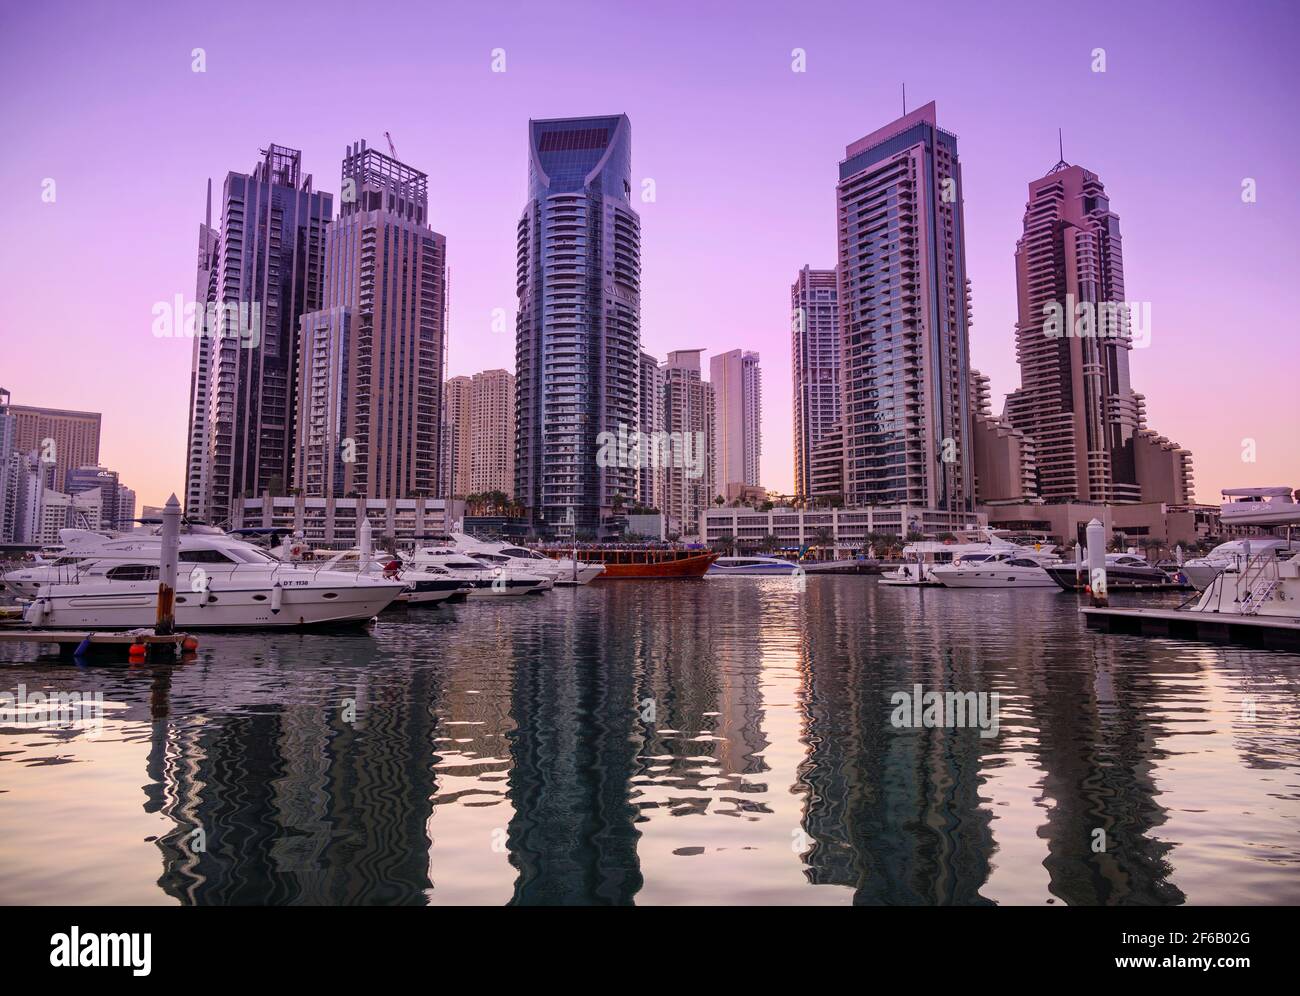 Beautiful sky scrappers, apartments, cruise ship deck and  hotels captured during the evening sunset time from the Marina mall Dubai Marina Promenade. Stock Photo